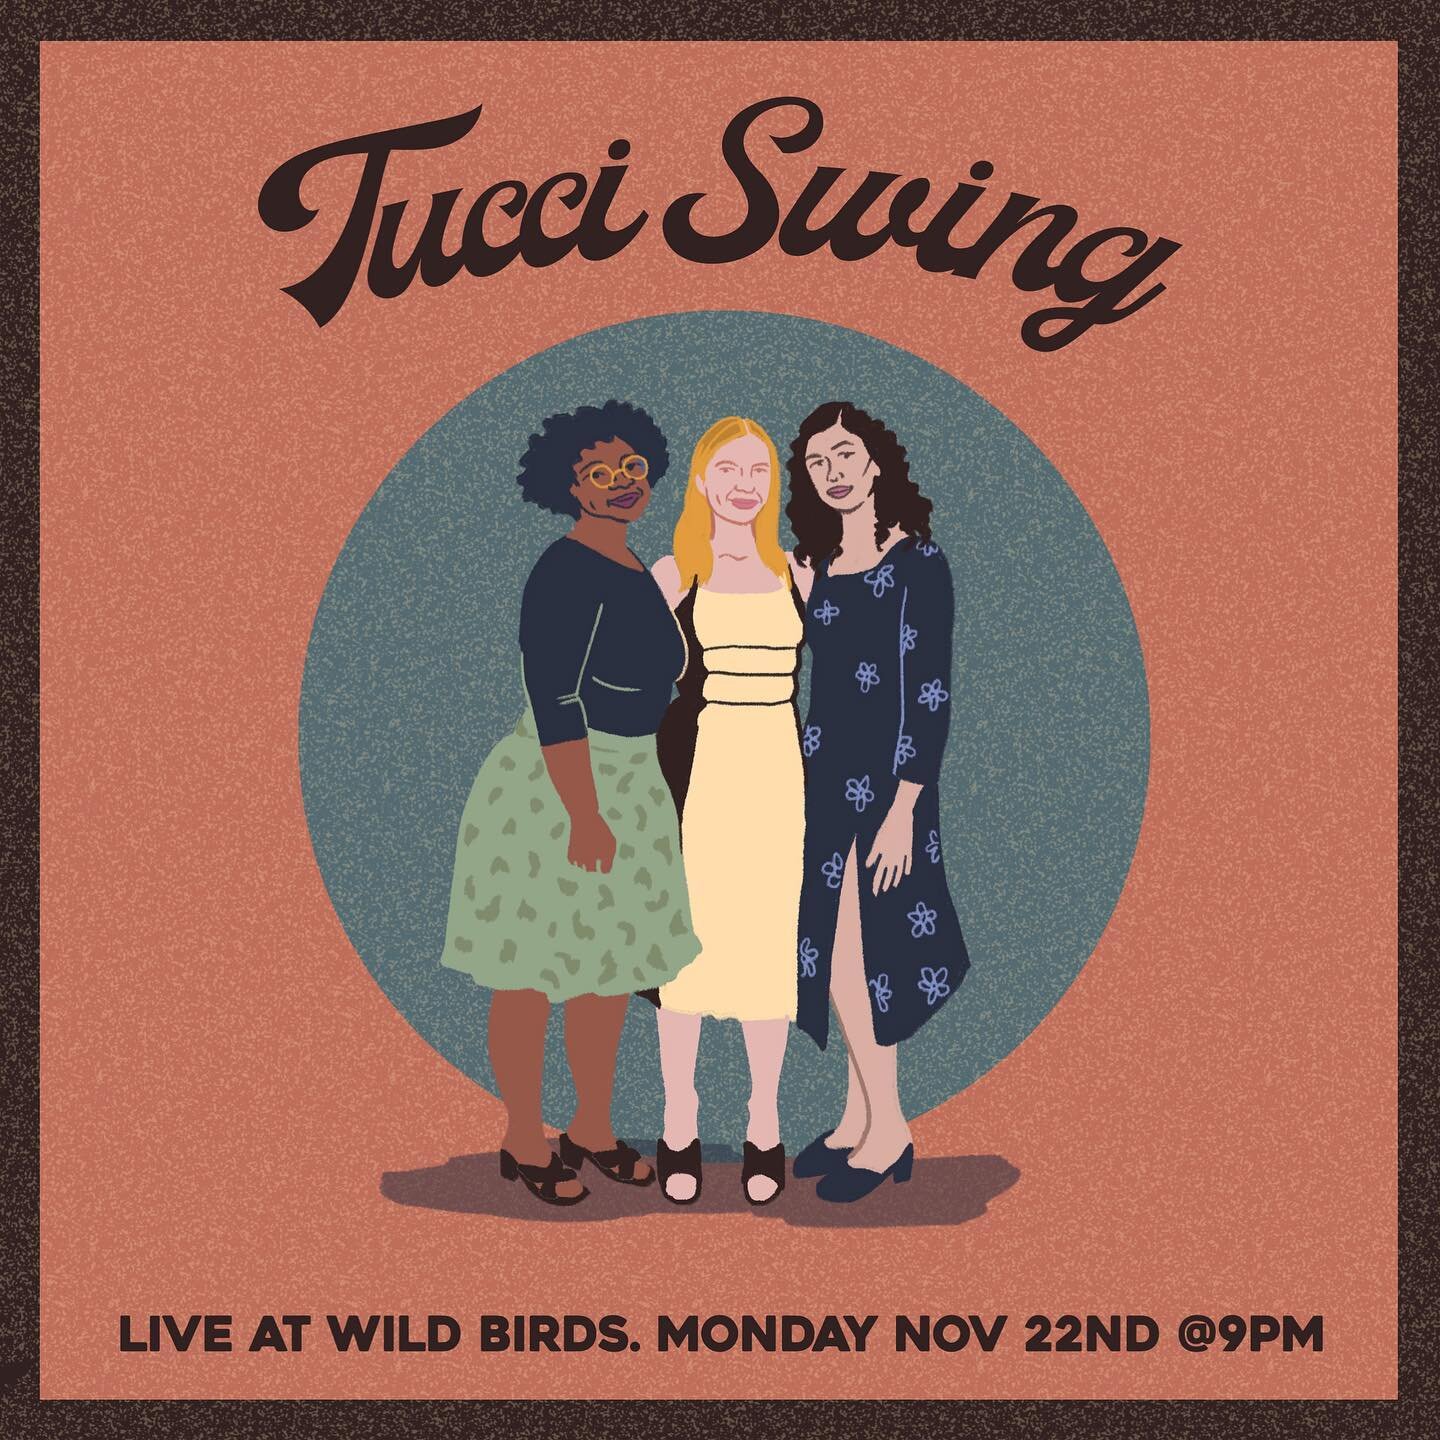 7-9pm: @melvissanta is a bright shinning star and bringing her quartet to wild birds, it&rsquo;s not to be missed 
9-11pm: @tucciswing are just one of the most amazing bands we have. The worlds greatest three part harmonies (poster art by the insanel